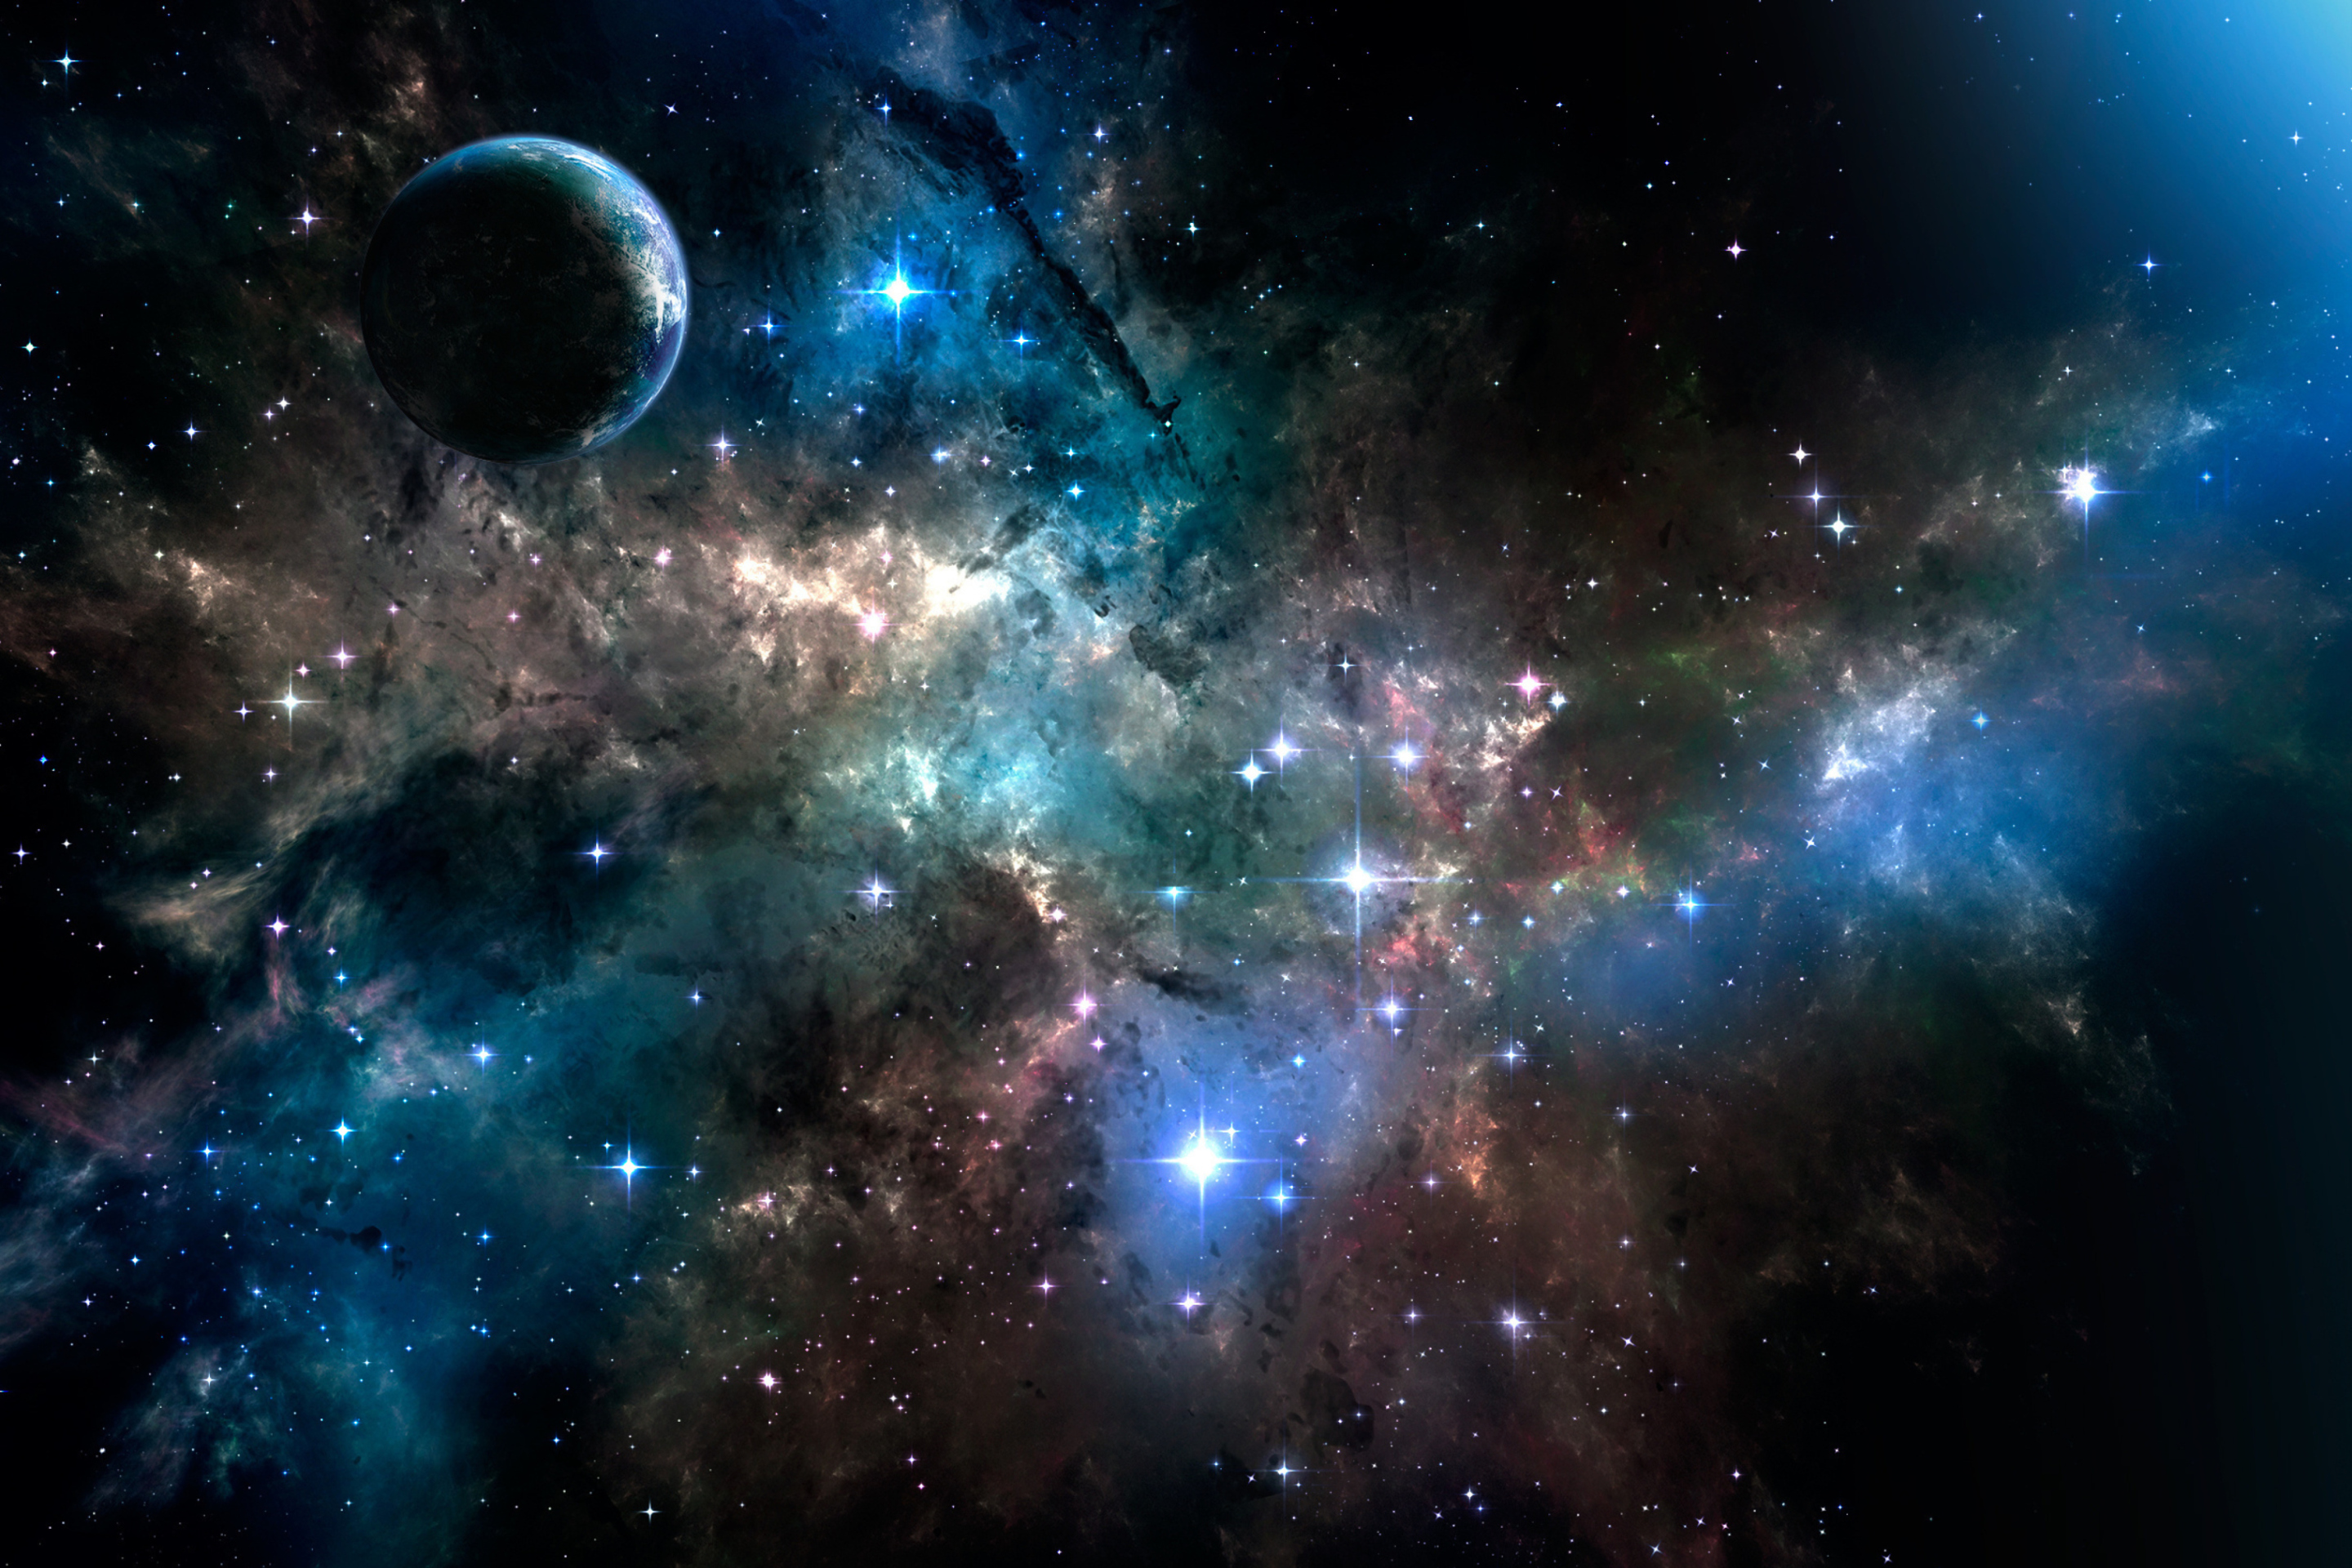 Deep Dark Space Wallpaper for Sony Xperia Z2 Tablet